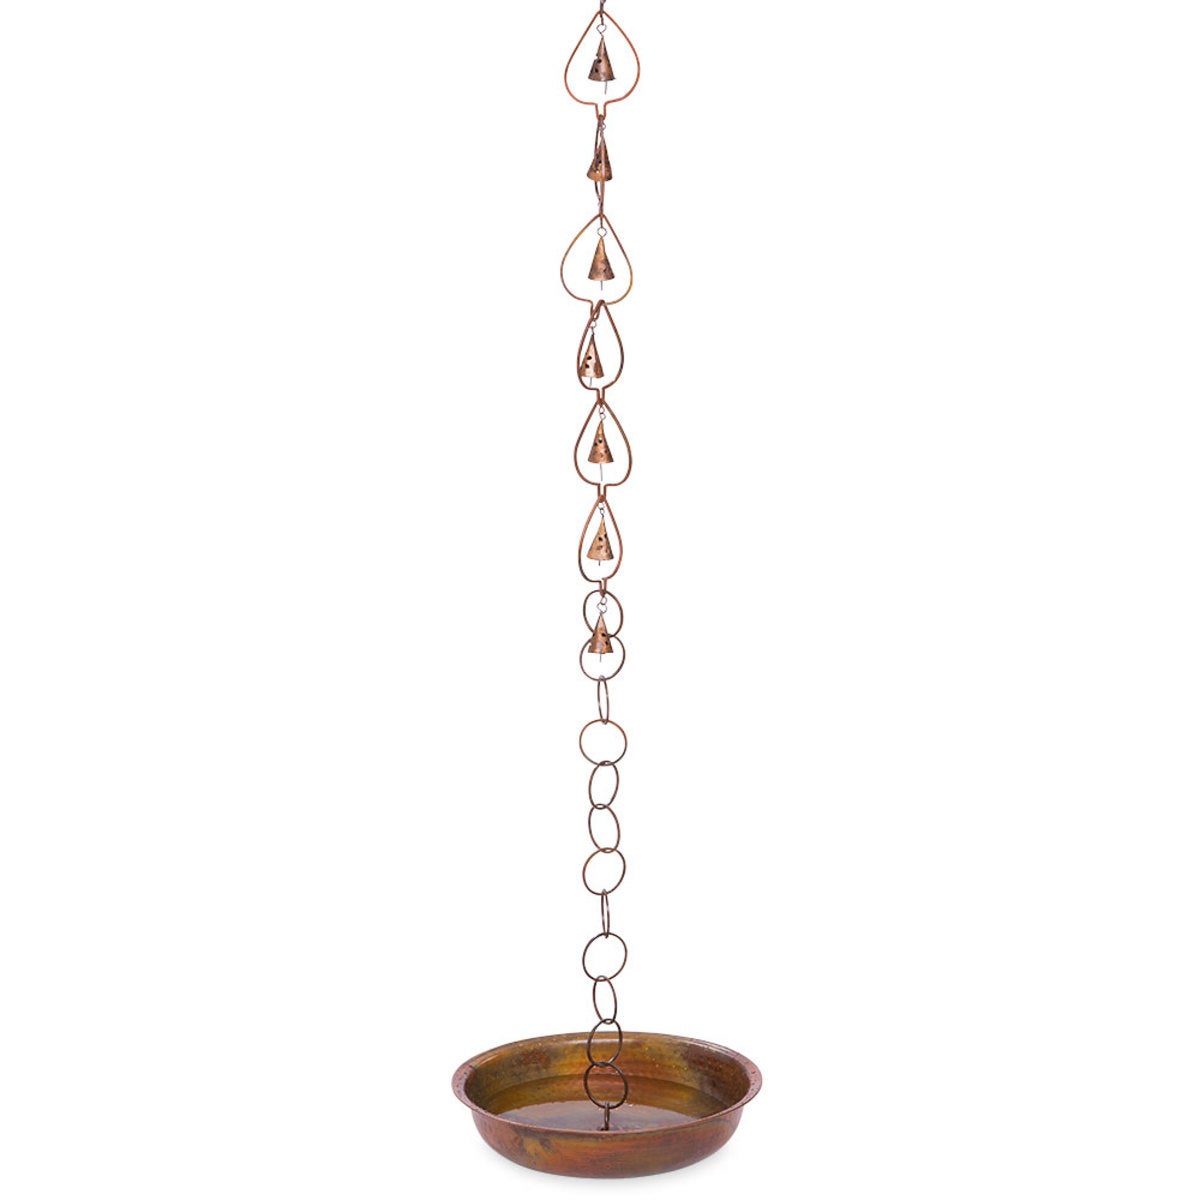 Aspen Leaf Bell Rain Chain with Receptacle Set